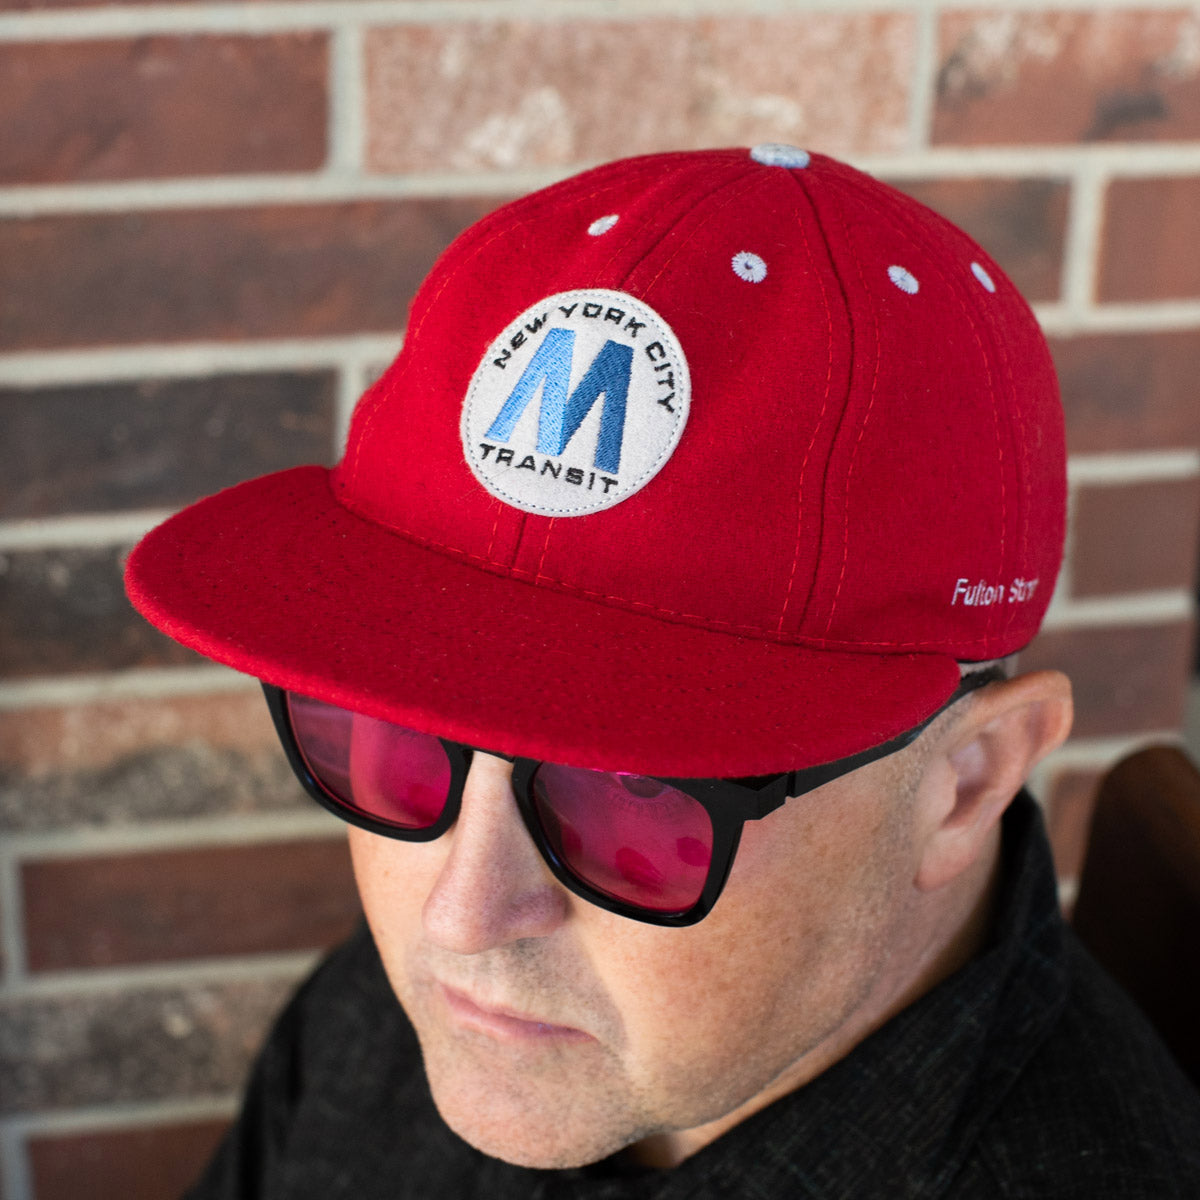 1968 MTA LOGO EBBETS FIELD HAT MADE IN THE USA - RED